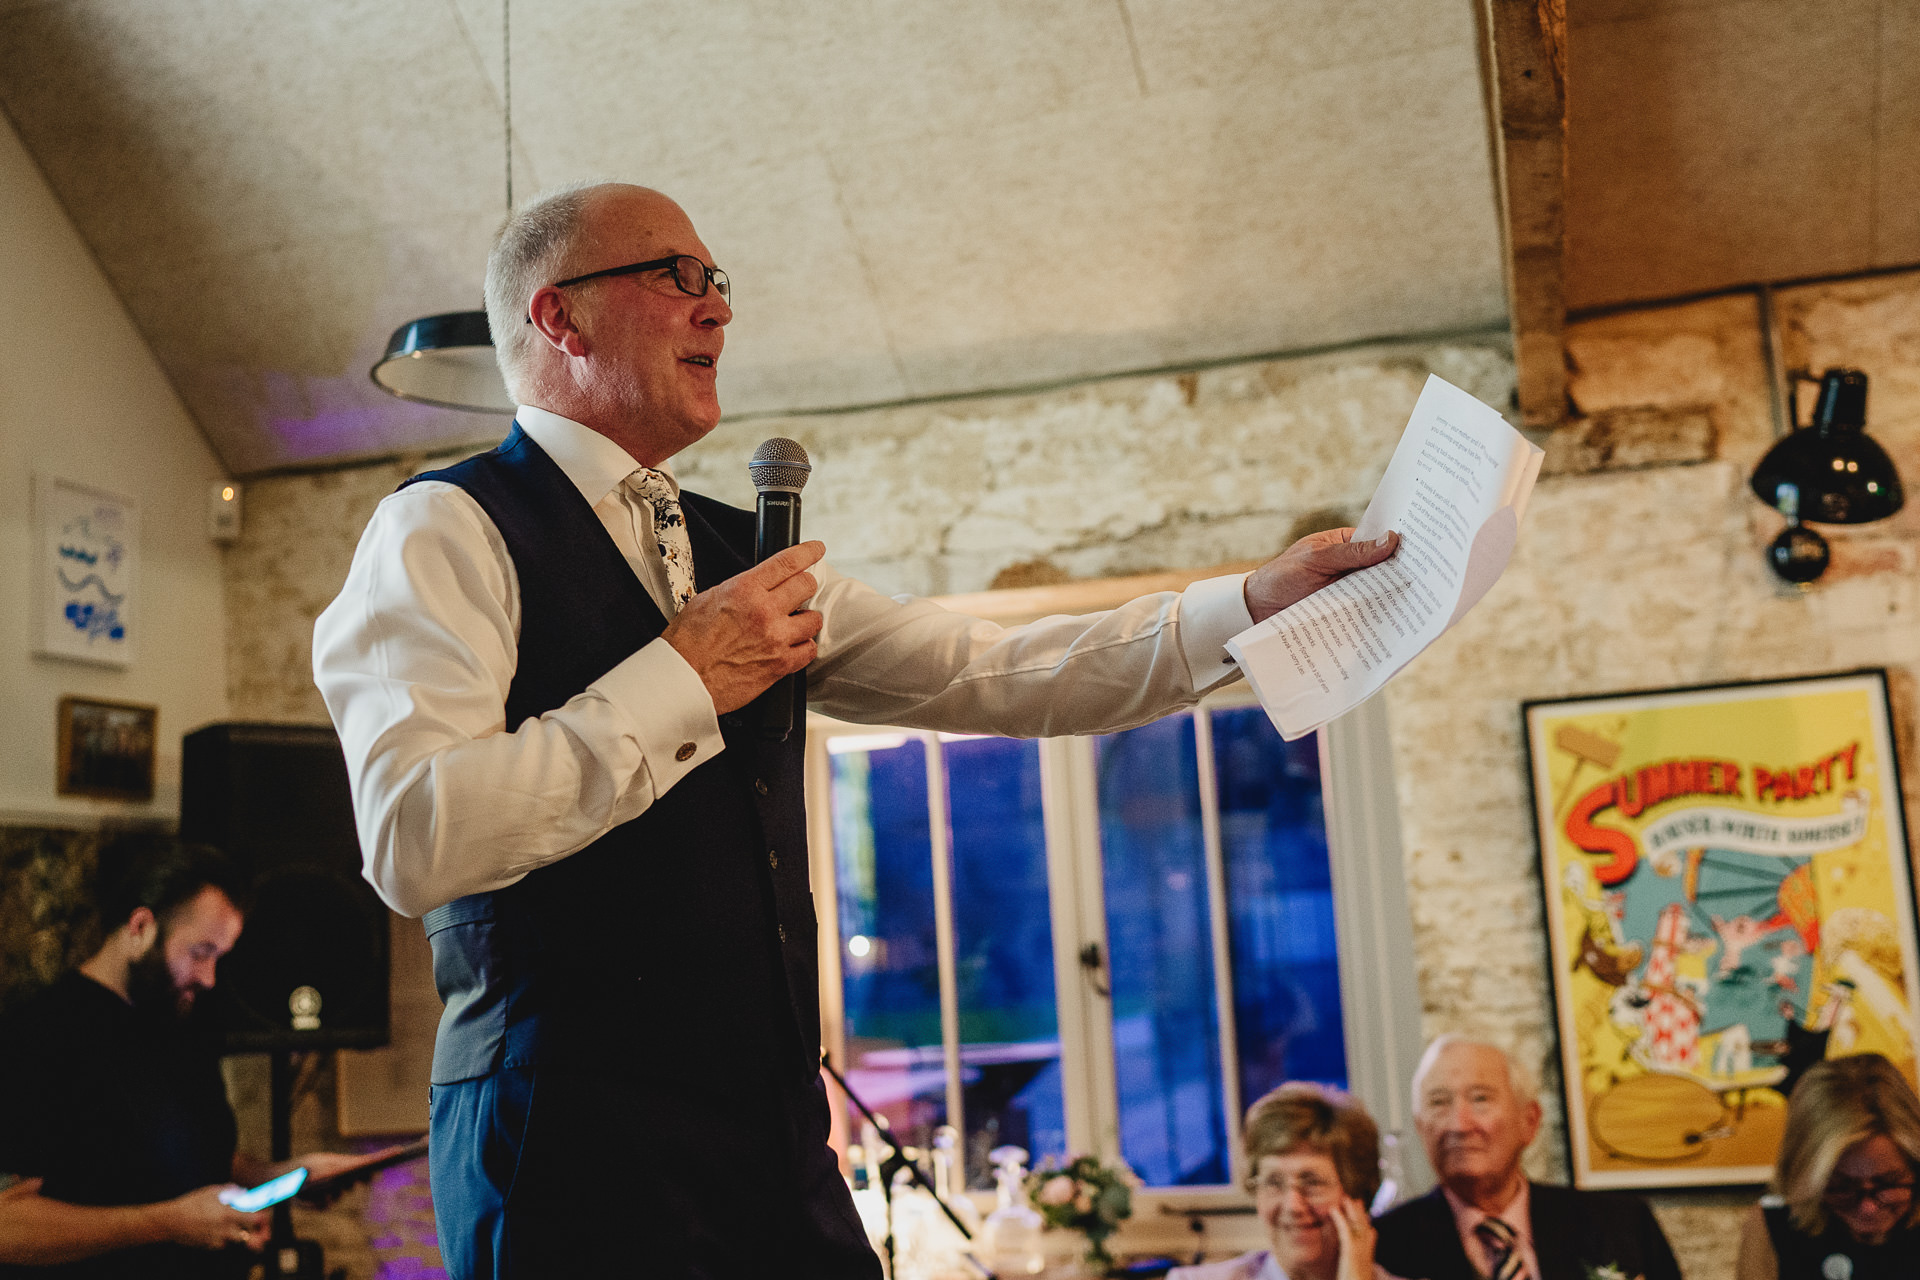 Father of the bride giving wedding speech